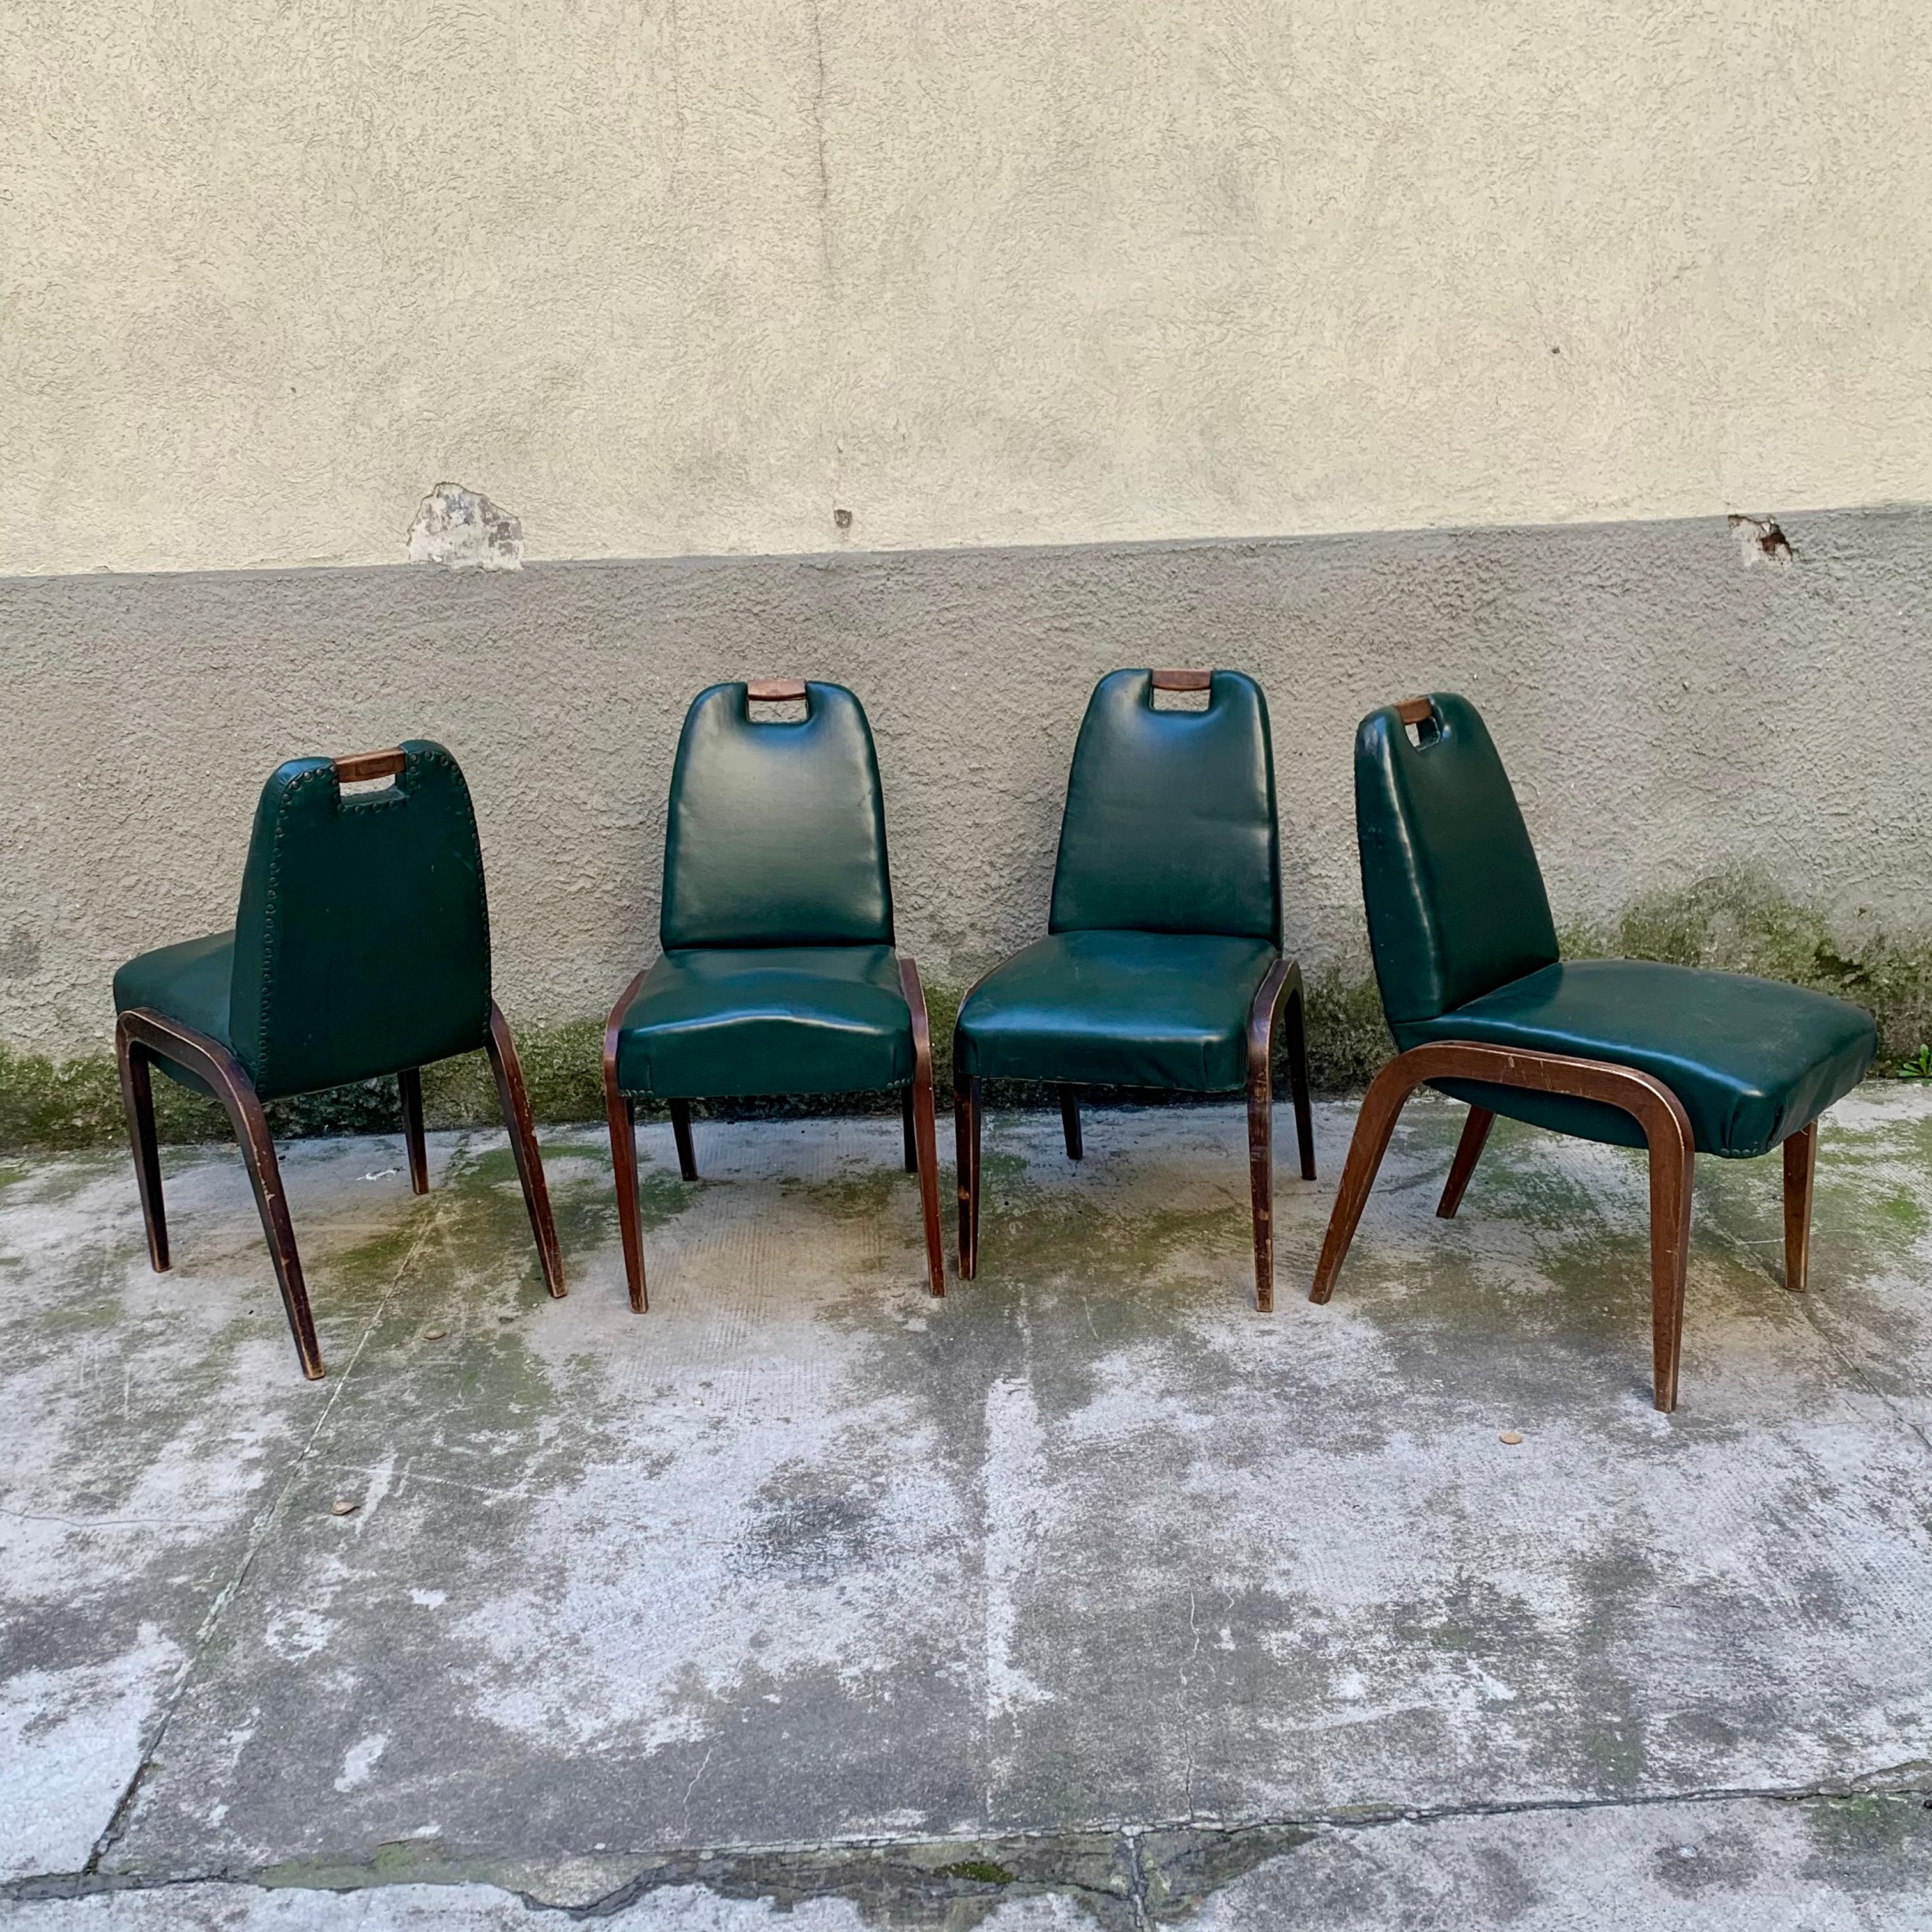 Italian Set of 4 Wood and Leatherette Chairs - Italy - 1930s For Sale